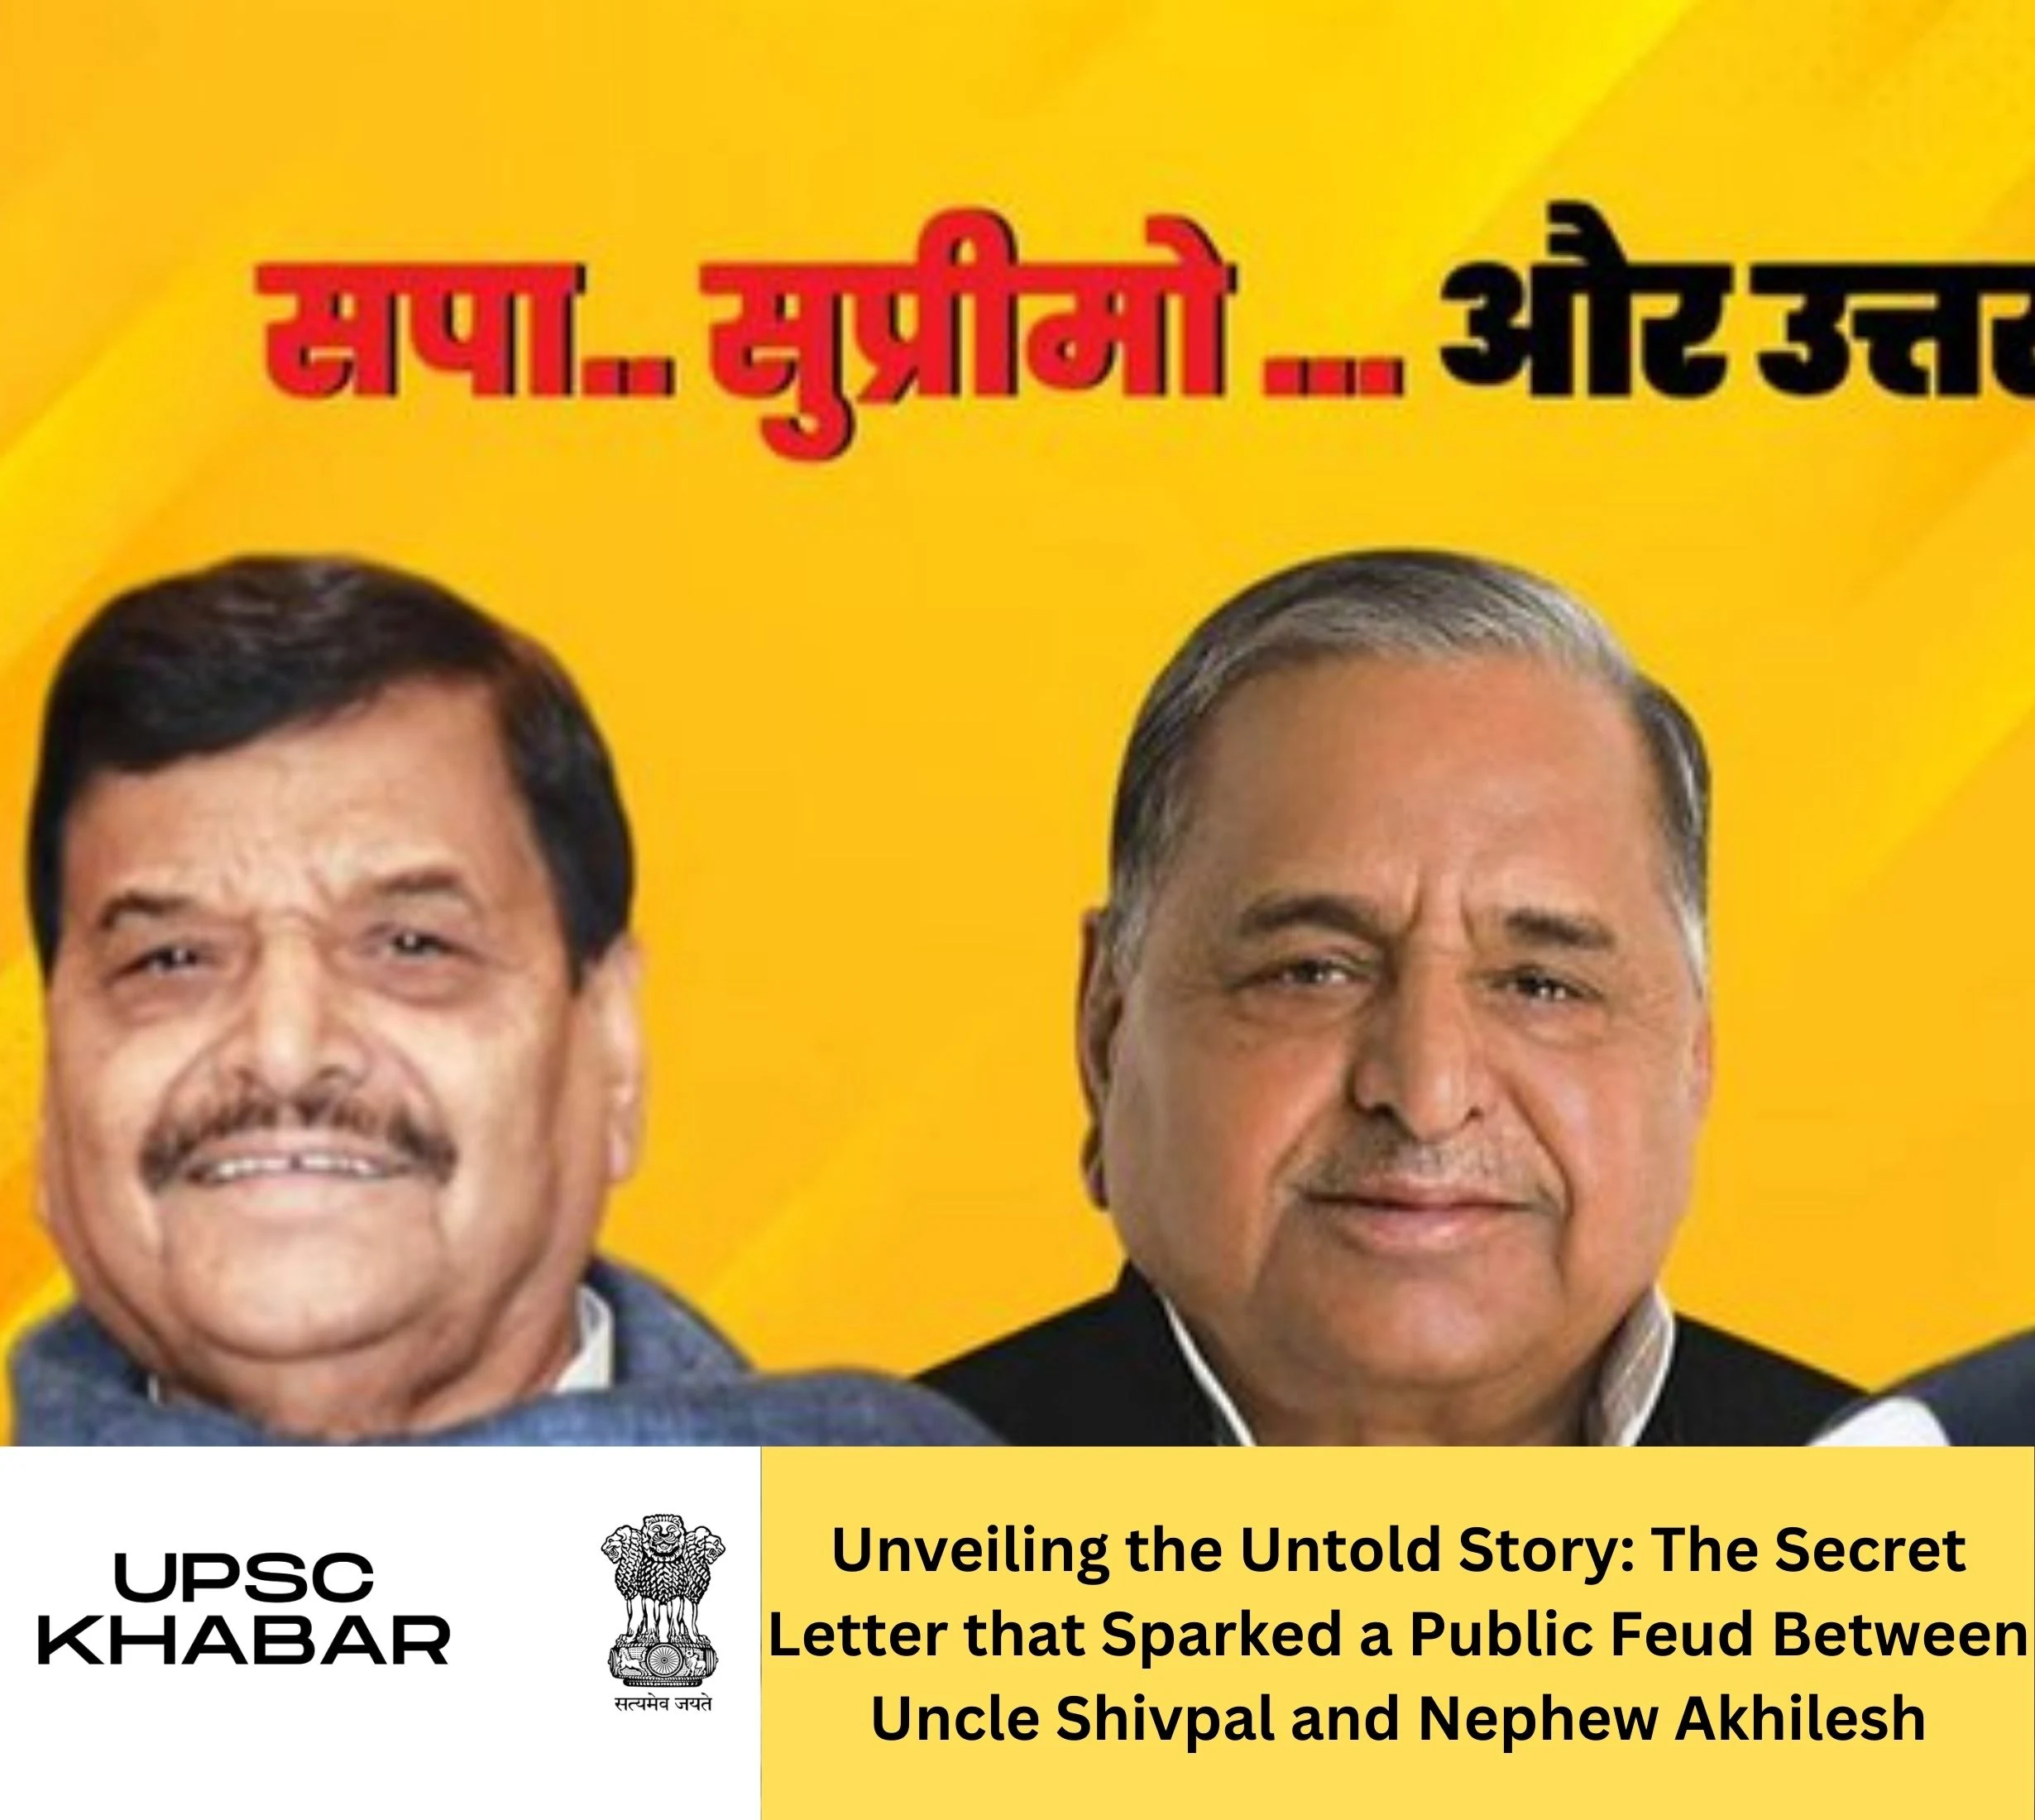 Unveiling the Untold Story: The Secret Letter that Sparked a Public Feud Between Uncle Shivpal and Nephew Akhilesh